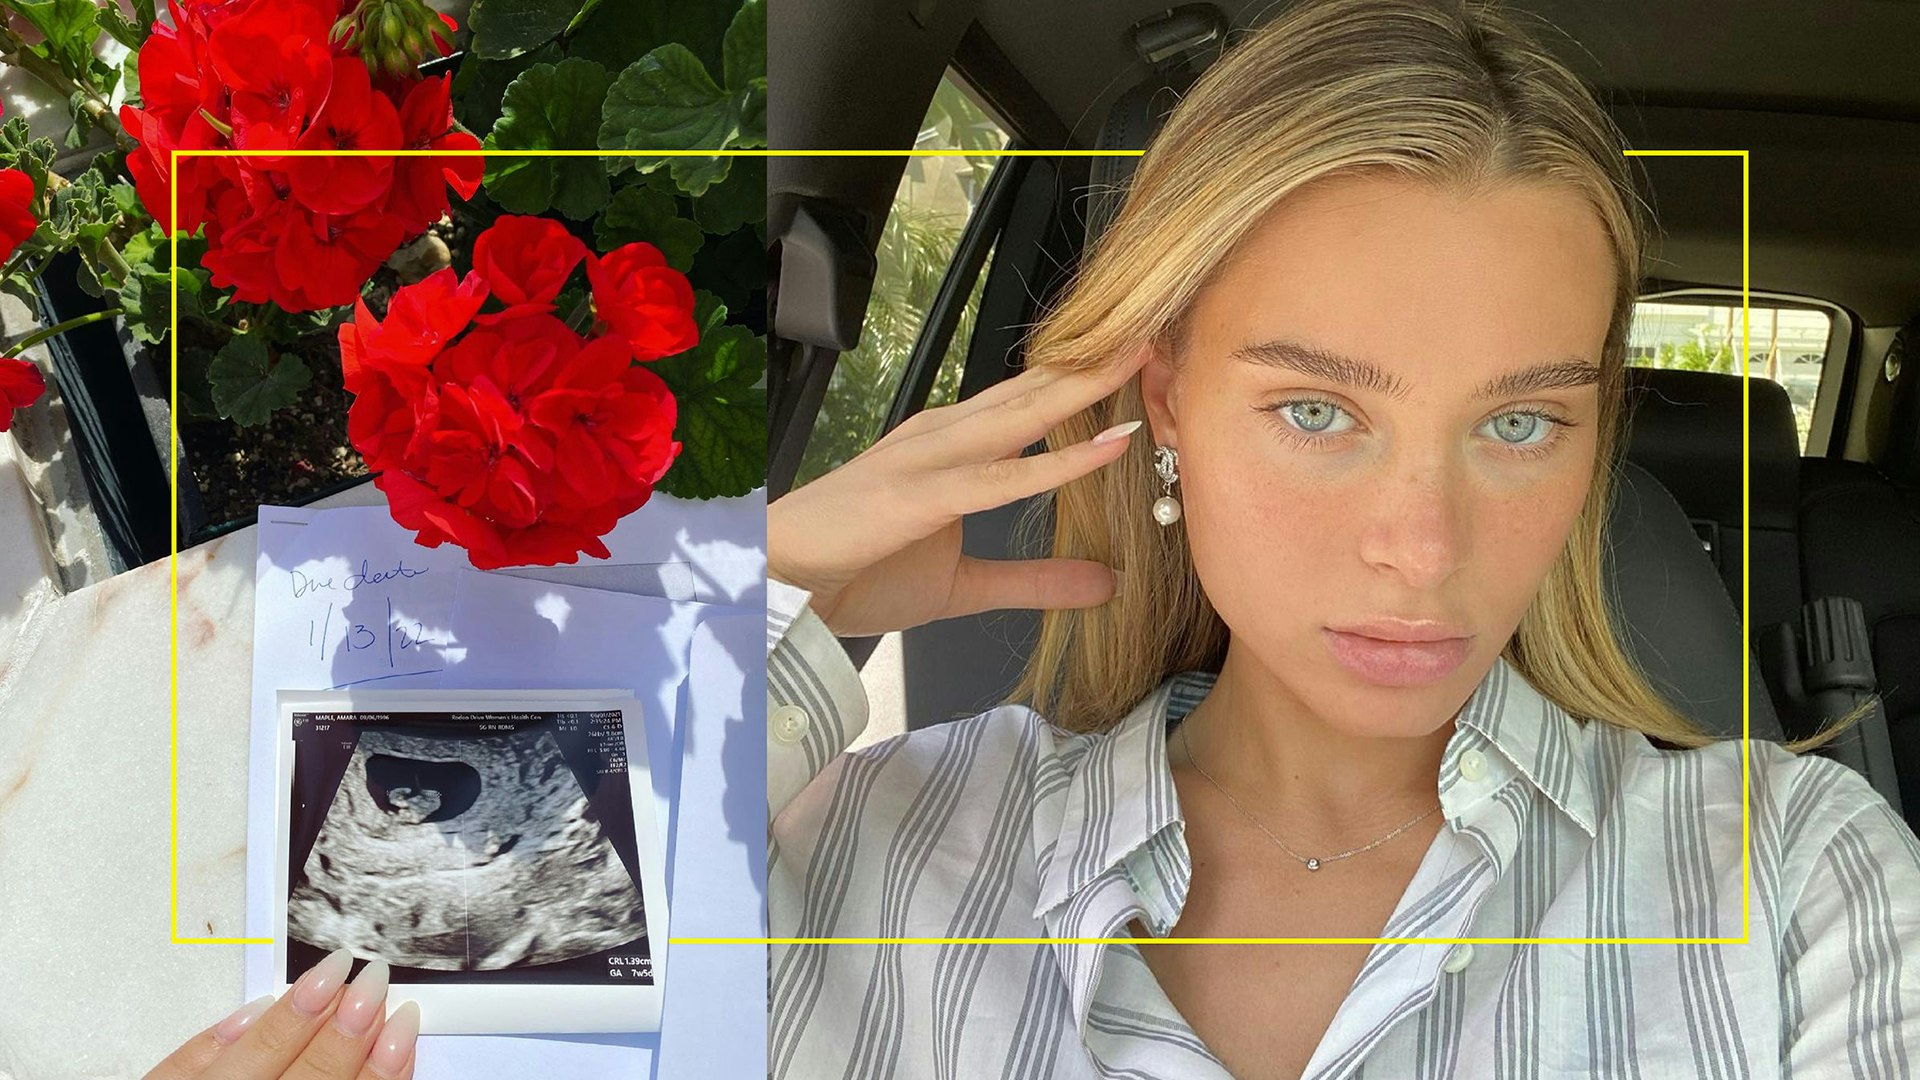 Lana Rhoudes - Why Is Everyone Obsessed With Who The Father Of Lana Rhoades Baby Is?